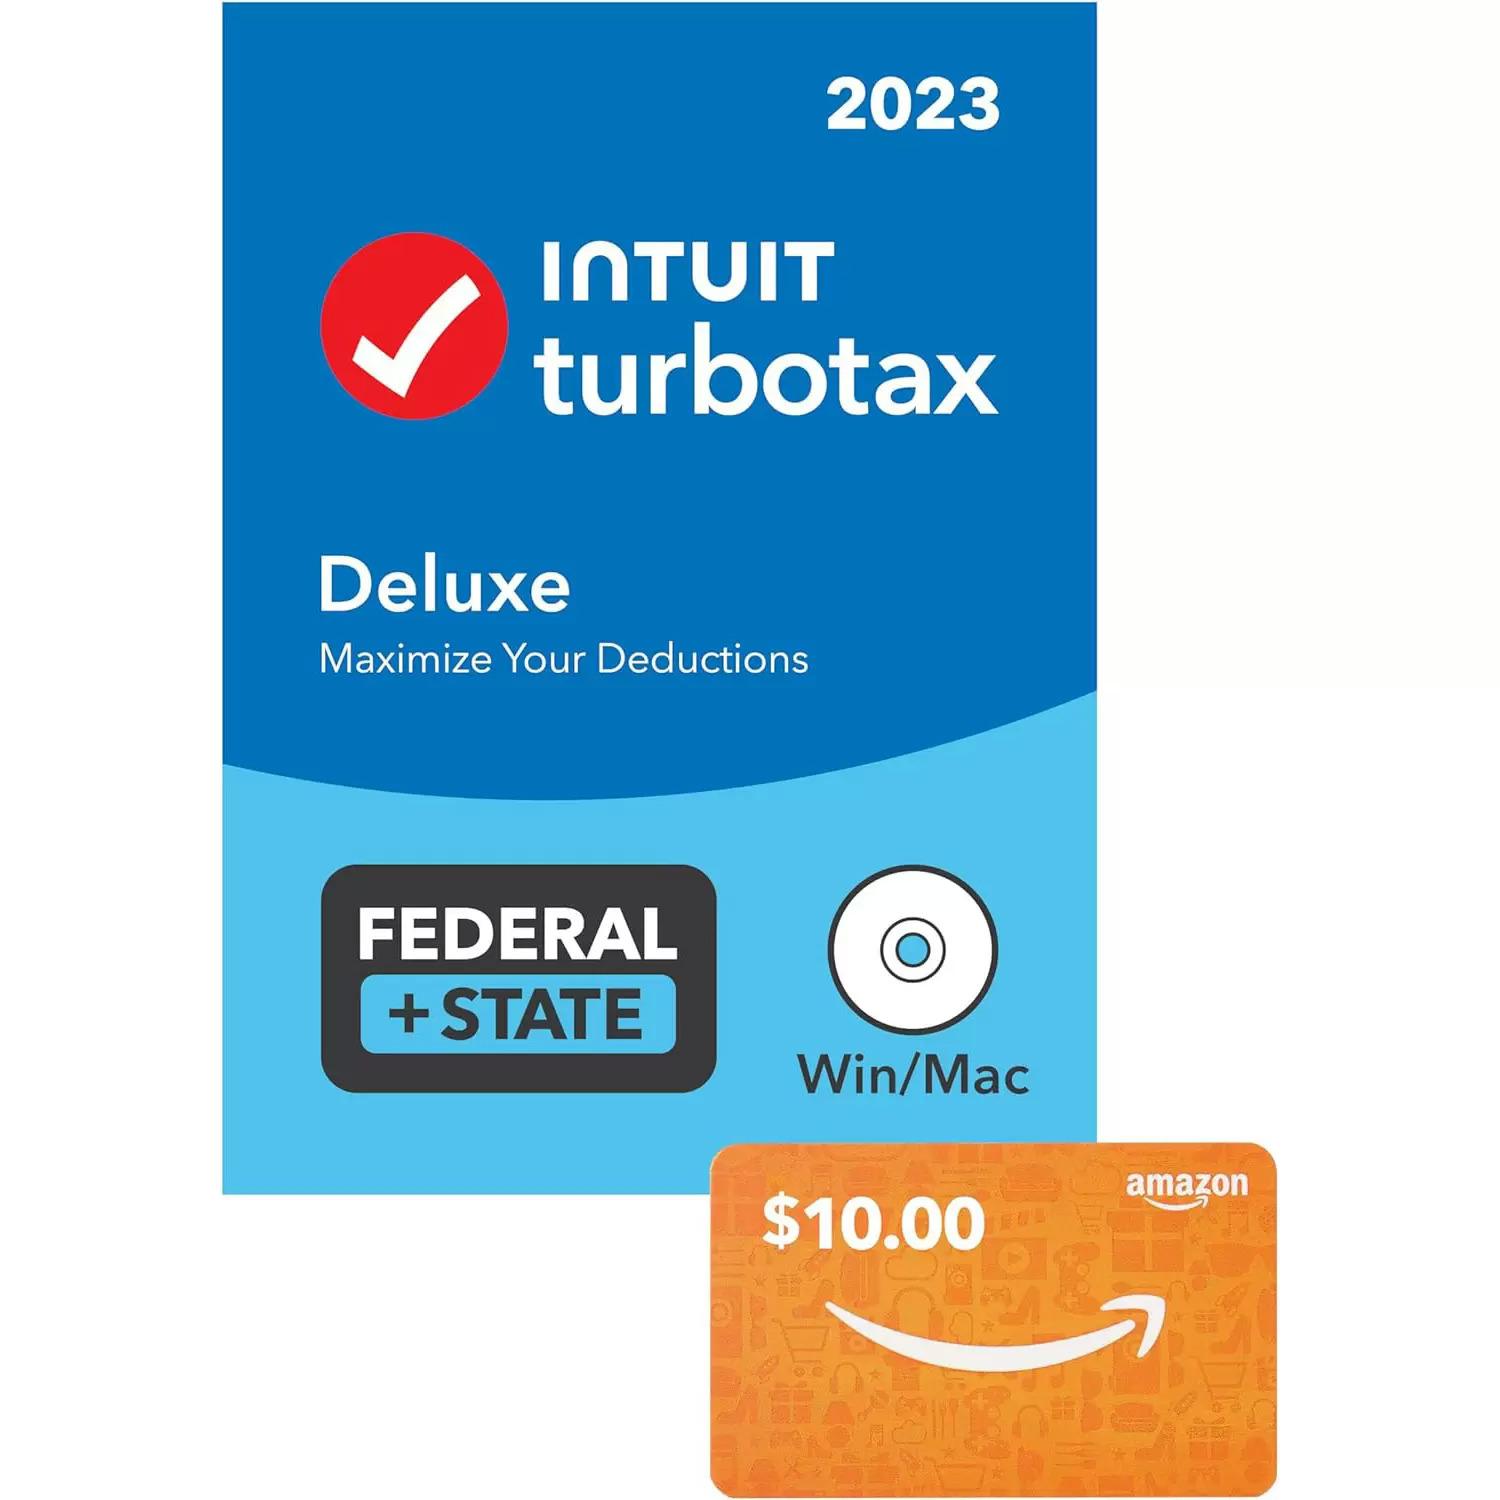 TurboTax Tax 2023 Return Software with $10 Amazon Gift Card for $44.99 Shipped